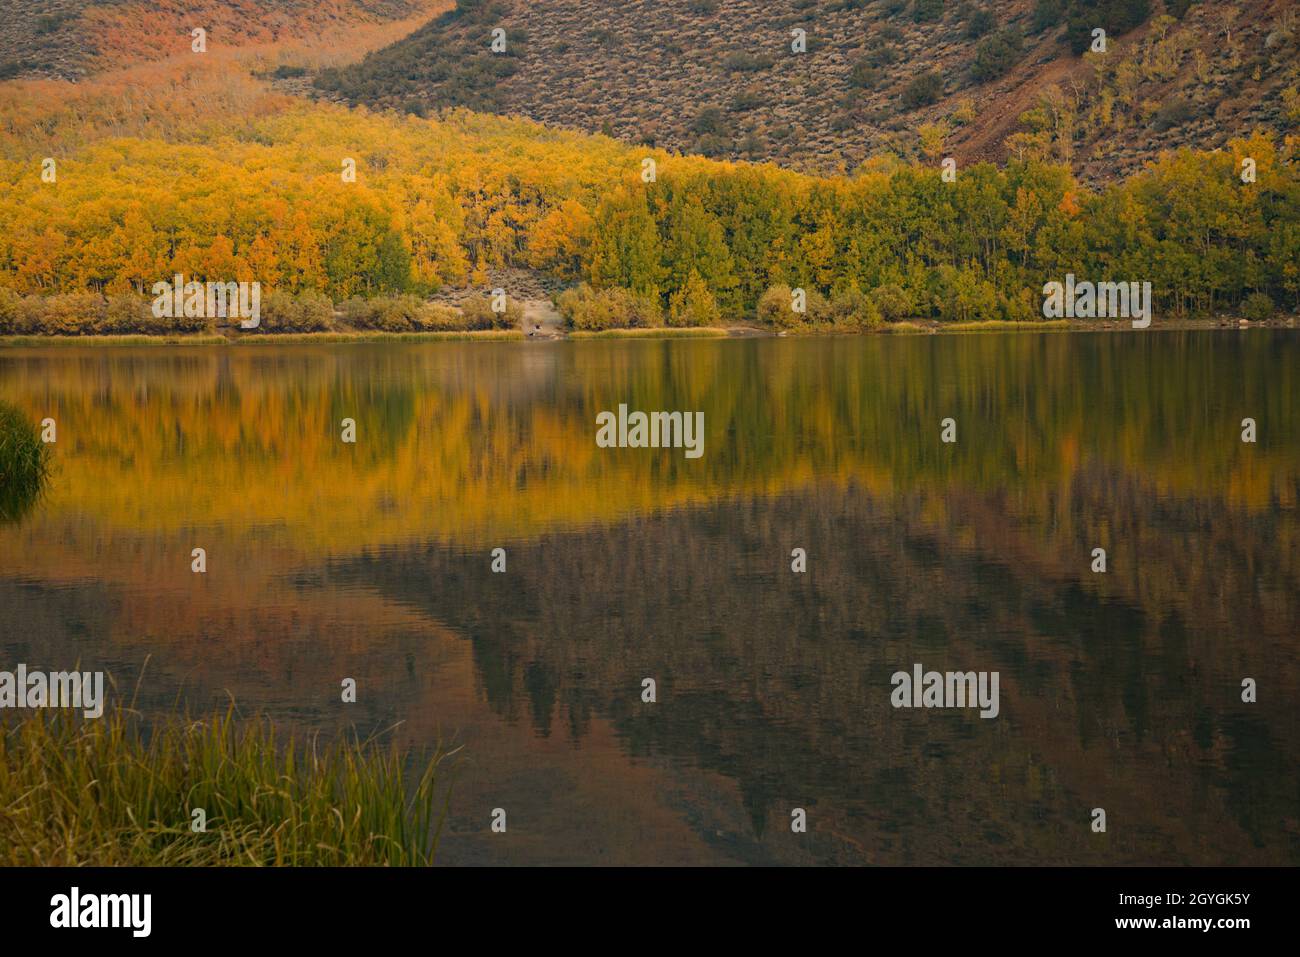 Reflecting fall foliage in the eastern Sierra lake, aspens & pines in mountain side setting landscape, scenic vibrant colors yellows, orange, green. Stock Photo